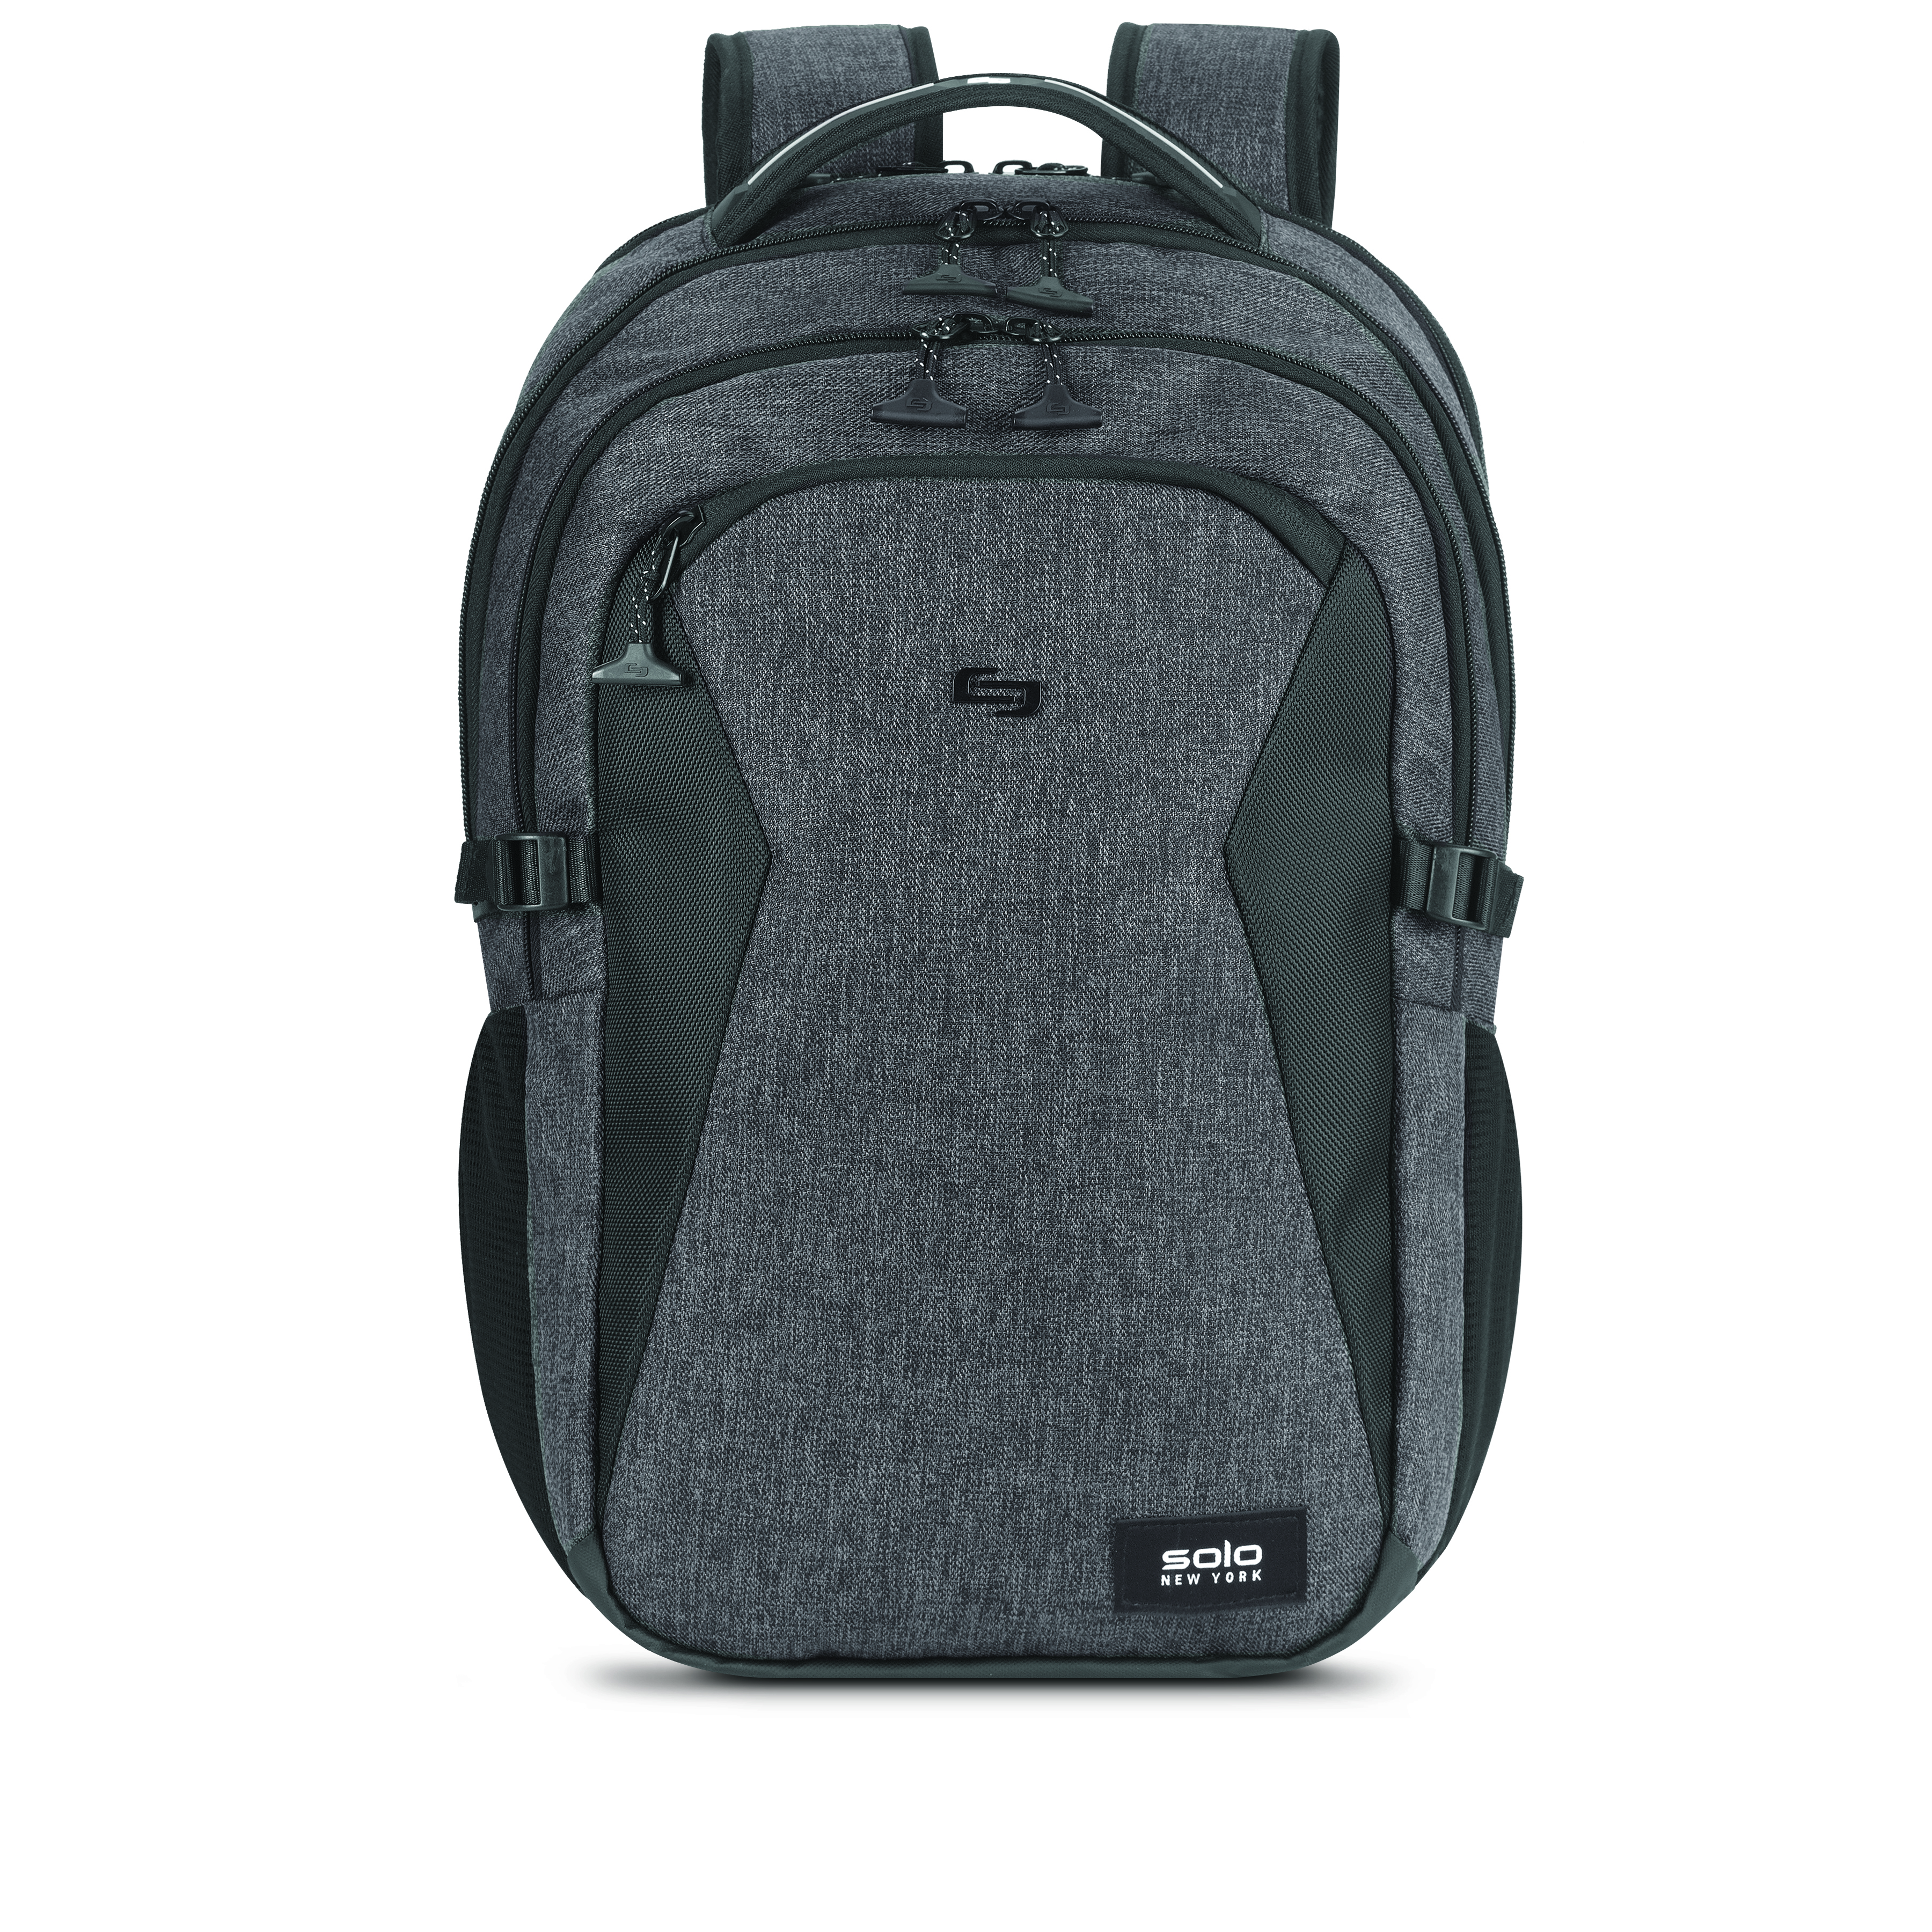 Unbound Backpack (Solo New York)